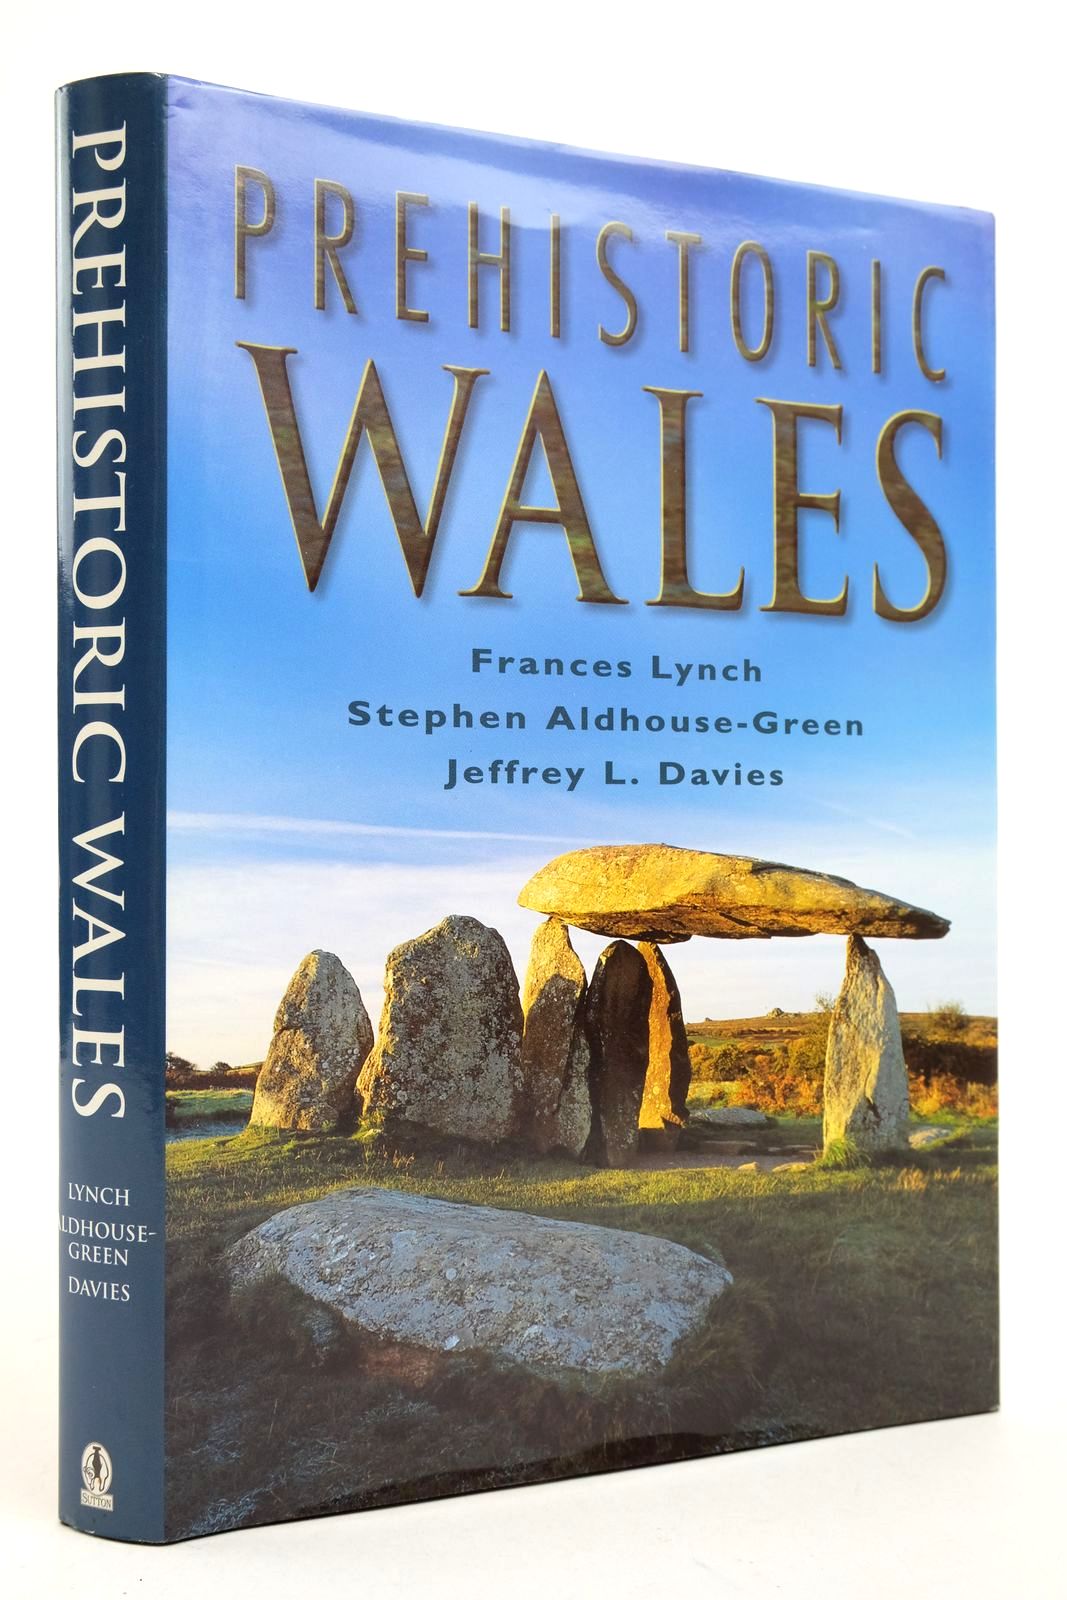 Photo of PREHISTORIC WALES written by Lynch, Frances M. Aldhouse-Green, Stephen Davies, Jeffery L. published by Sutton Publishing (STOCK CODE: 2140739)  for sale by Stella & Rose's Books